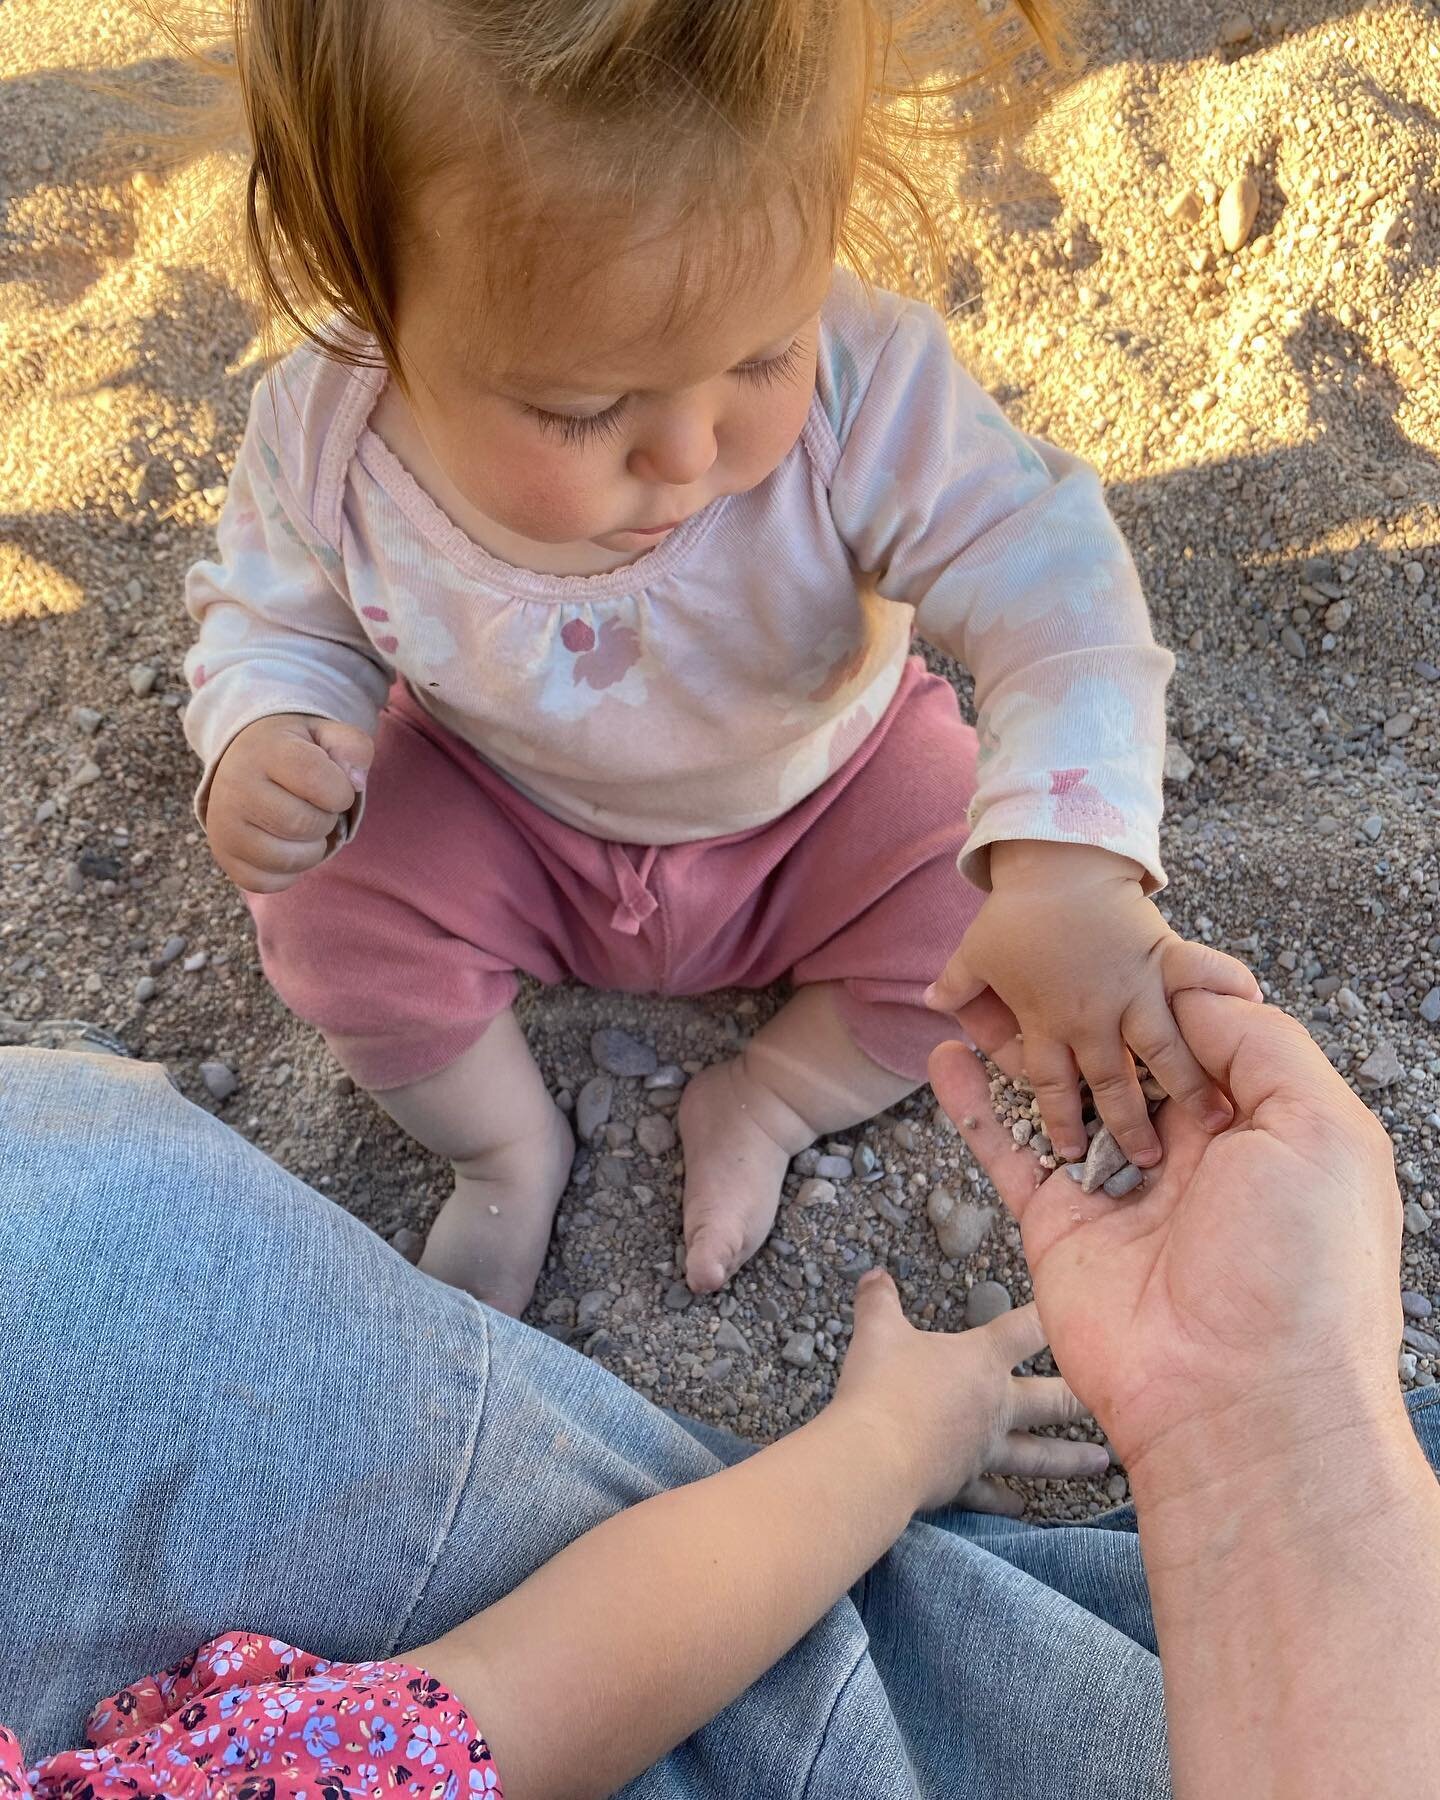 Dirt, the highlight of a child&rsquo;s day.